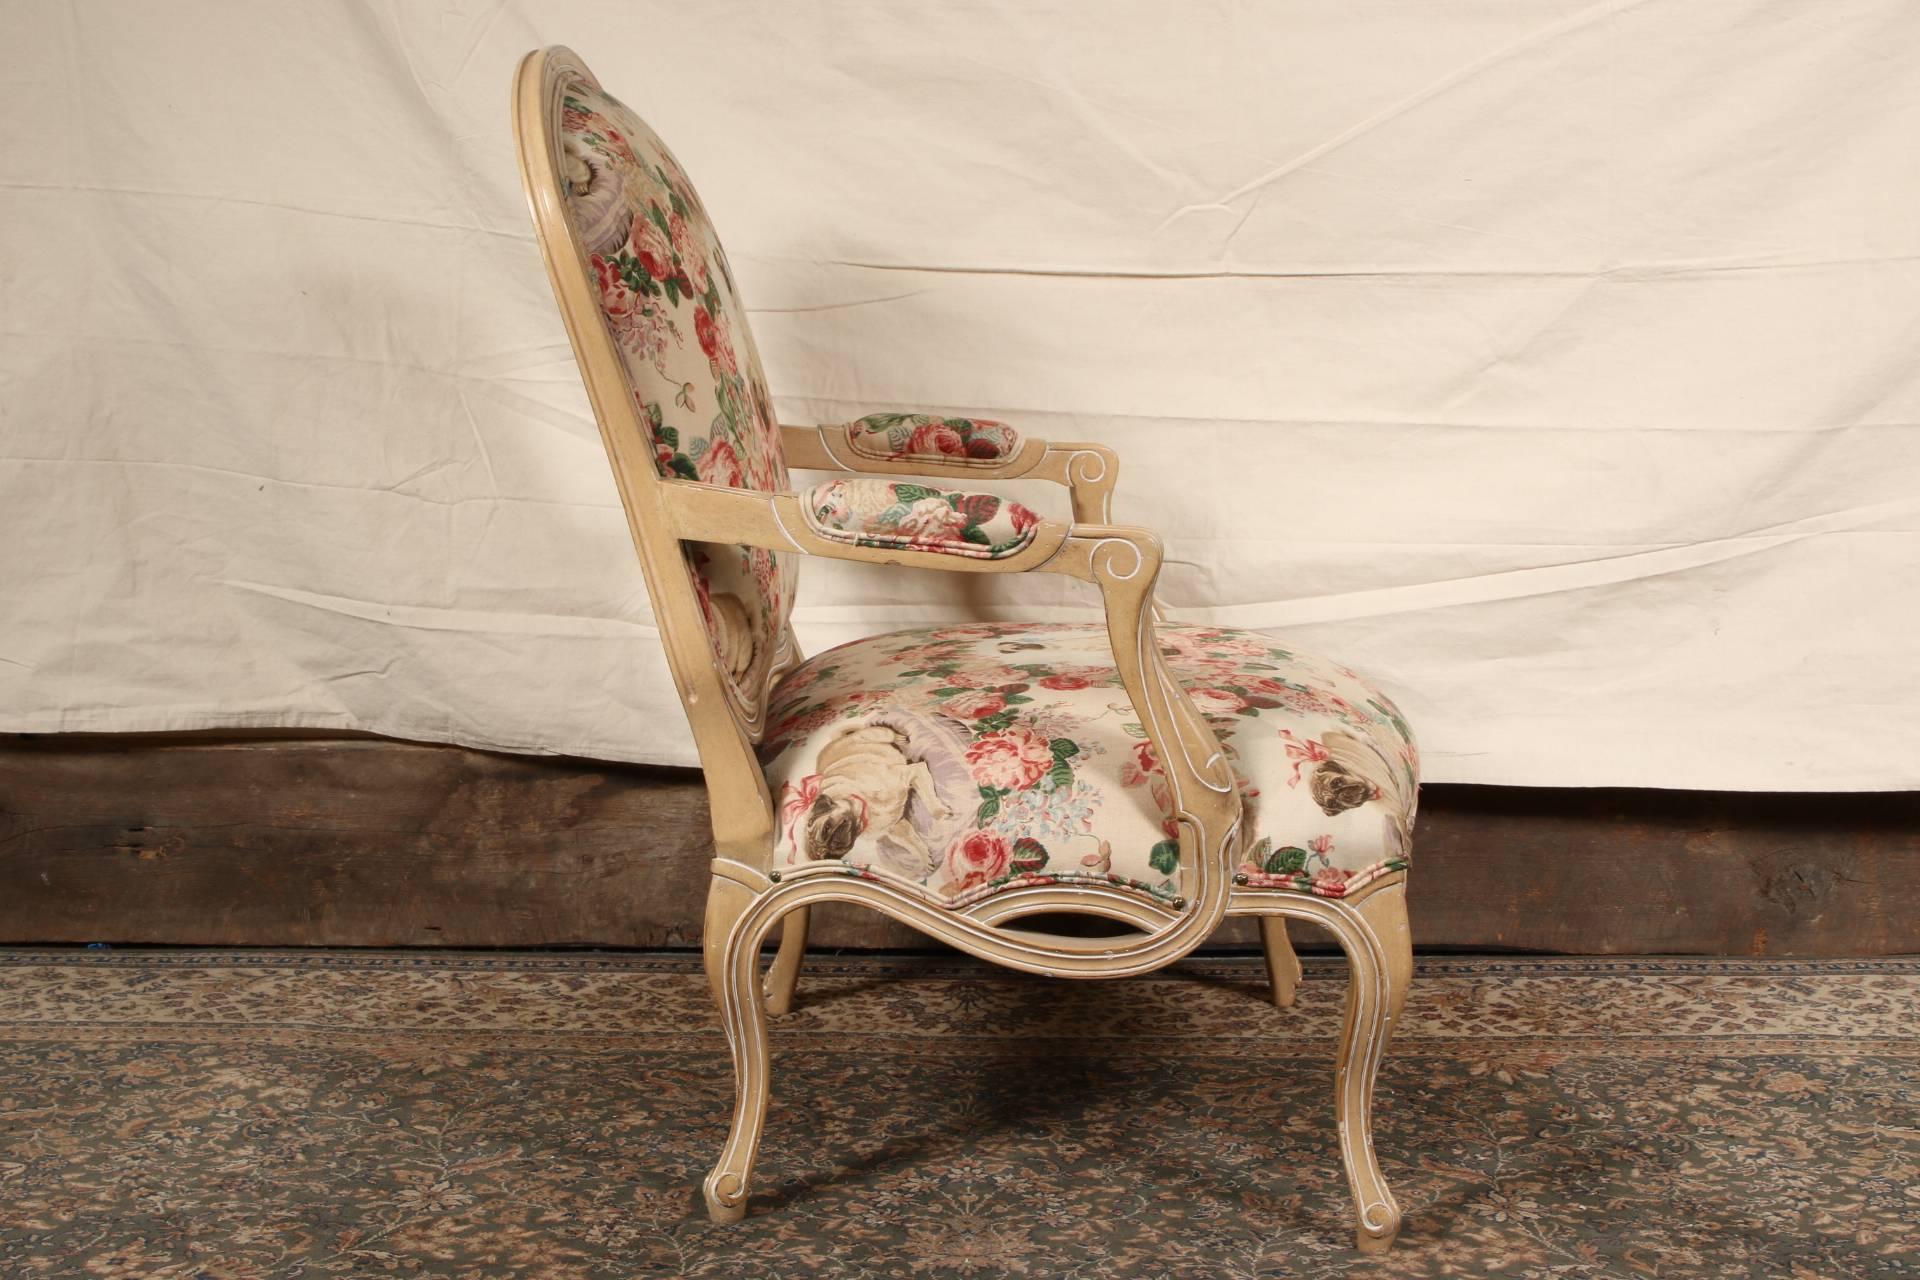 20th Century Pair of Kreiss Paint Decorated Fauteuils in Lee Jofa Pugs and Petals Fabric